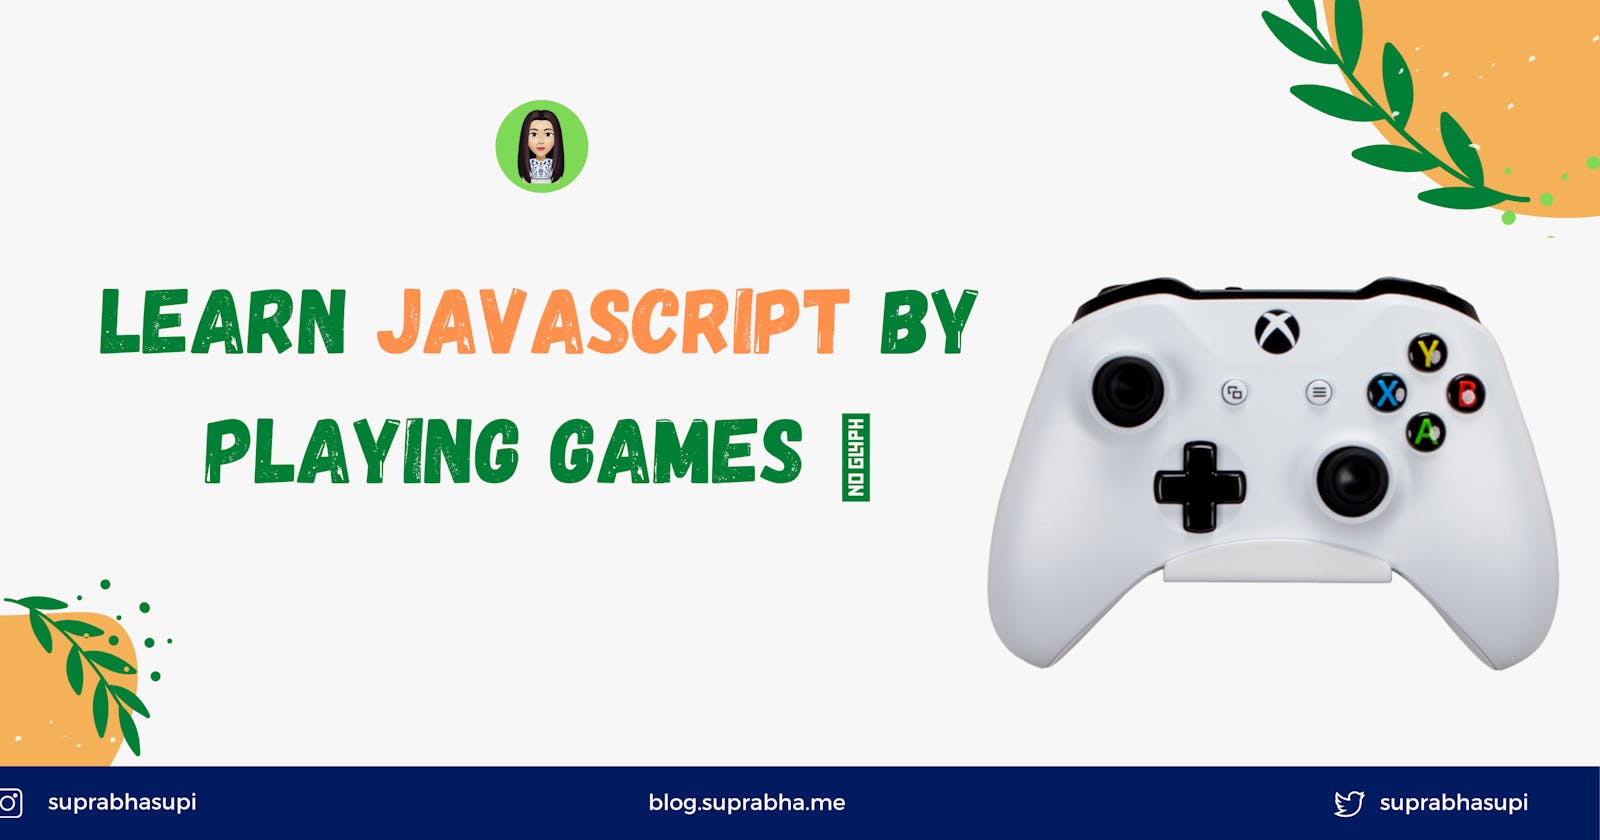 Learn JavaScript by Playing Games 🎮